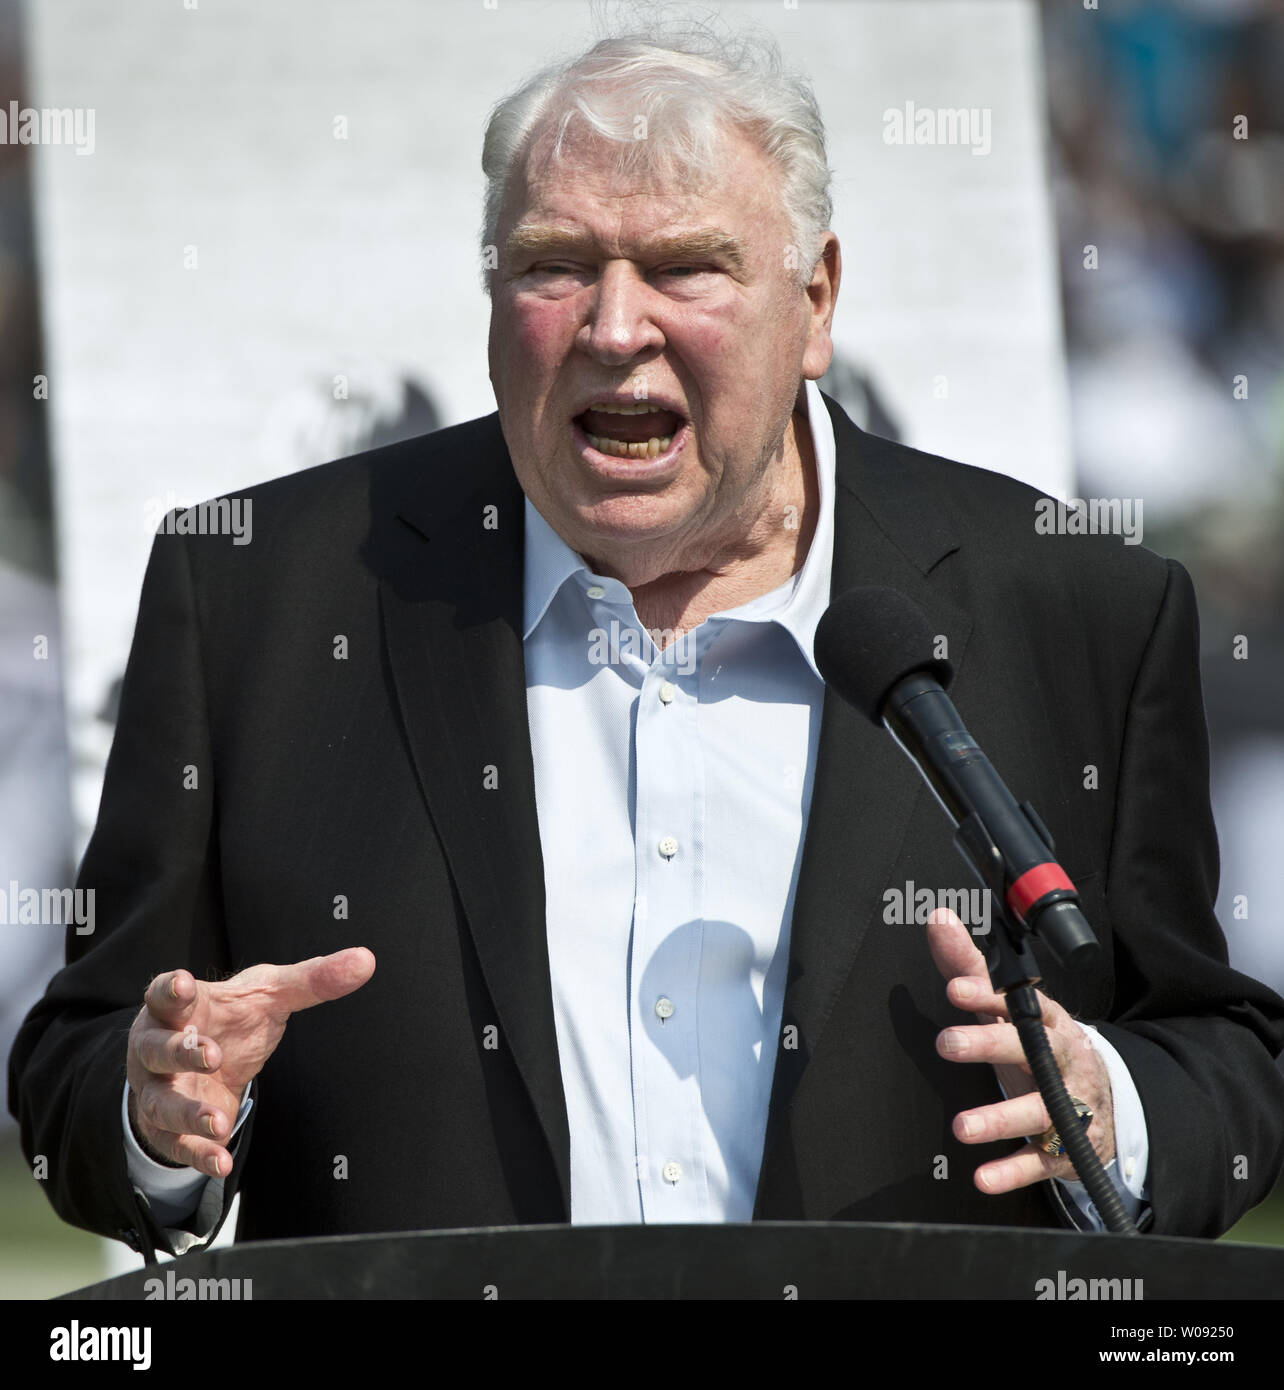 Former Oakland Raiders coach and sportscaster John Madden speaks at a halftime tribute to the late Ken Stabler, QB of the Super Bowl XI winning Raiders with Madden as coach, at O.co Coliseum in Oakland, California on September 13, 2015.   Photo by Terry Schmitt/UPI Stock Photo